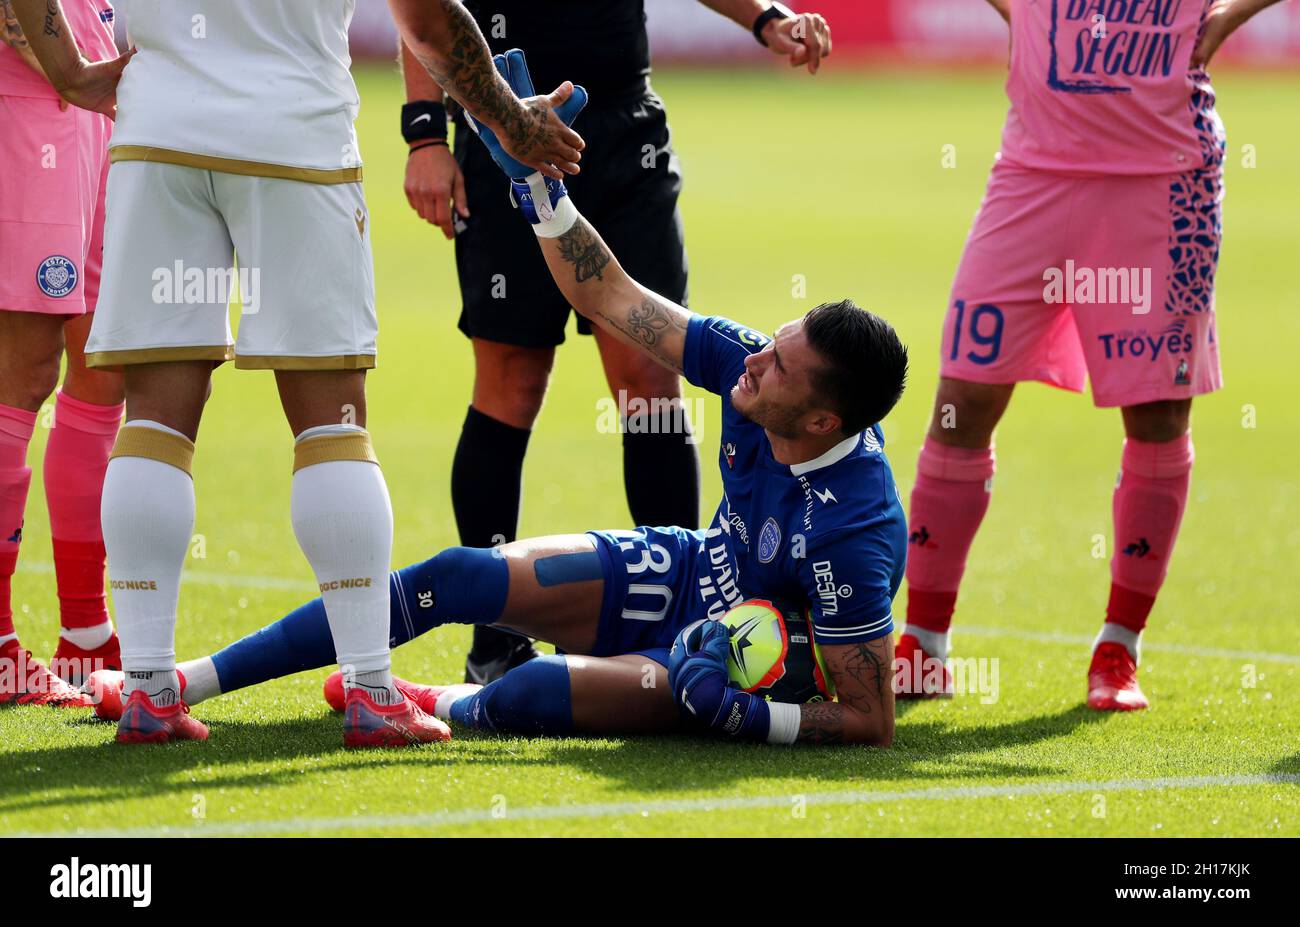 Soccer Football - Ligue 1 - Troyes v OGC Nice - Stade de l'Aube, Troyes,  France - October 17, 2021 Troyes' Gauthier Gallon down injured  REUTERS/Pascal Rossignol Stock Photo - Alamy